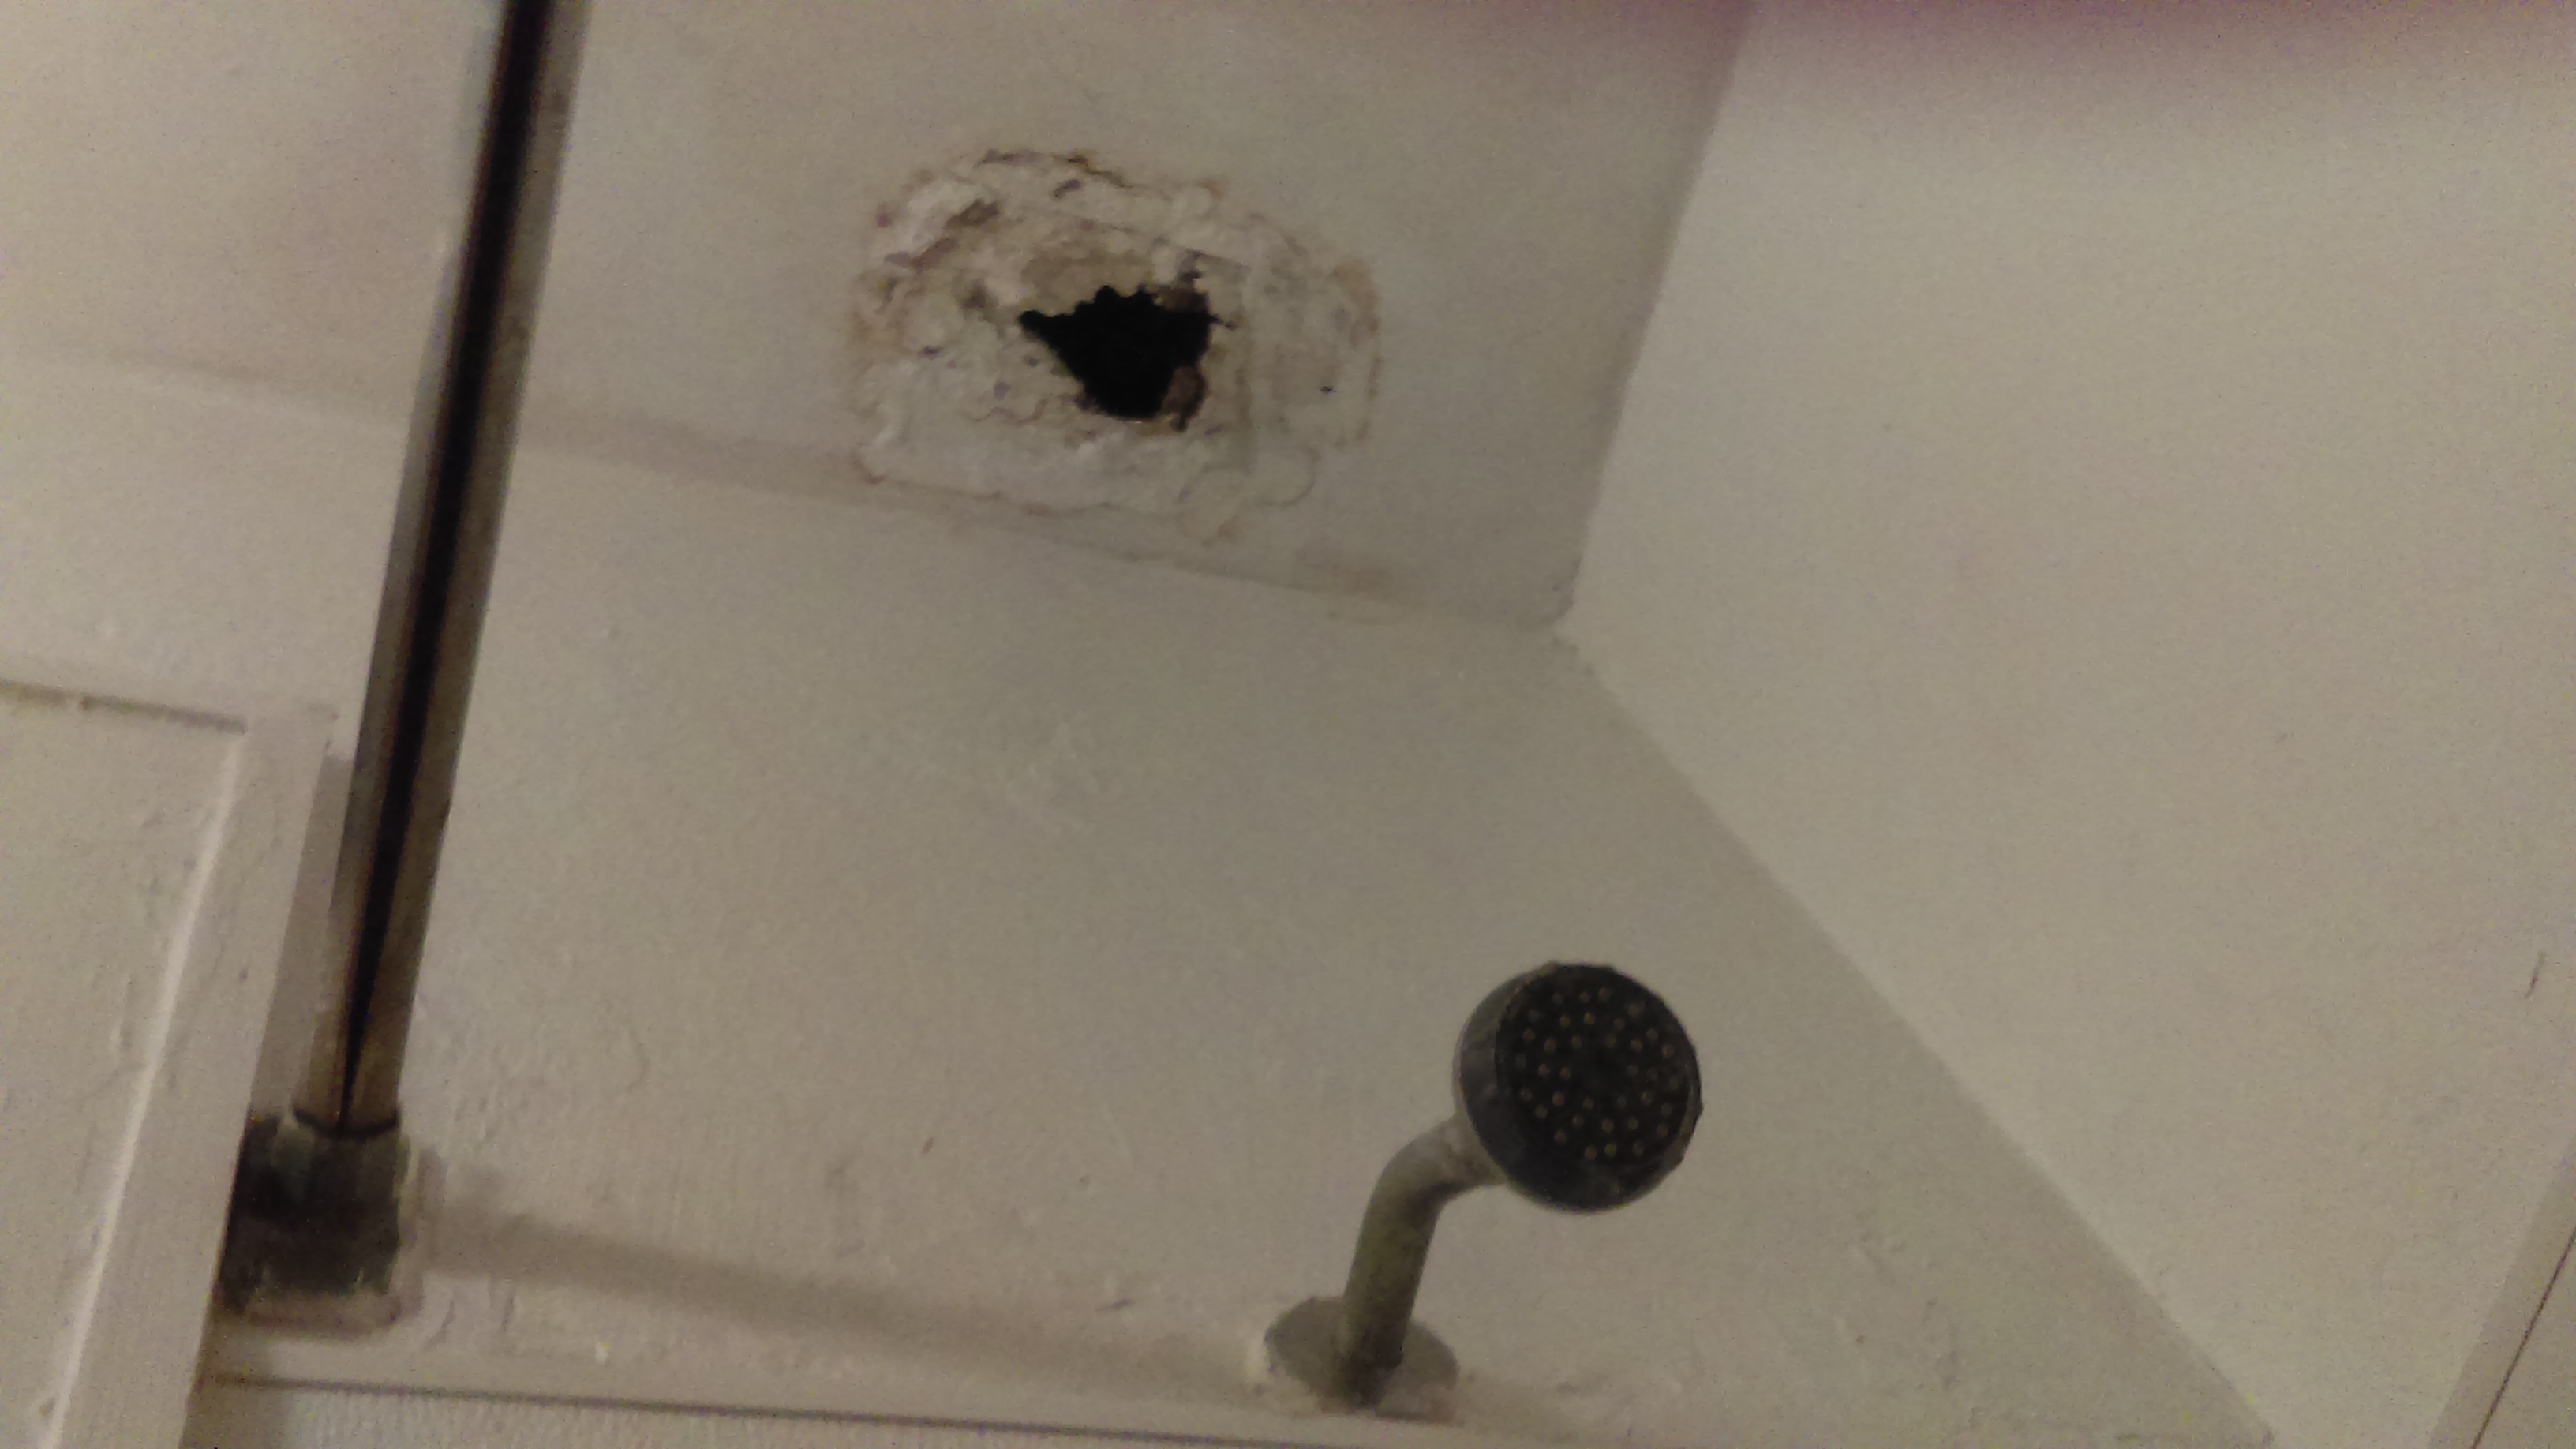 Hole in my roof. I put in 5 maintenance request in a 3 year period, and they never fixed it. 